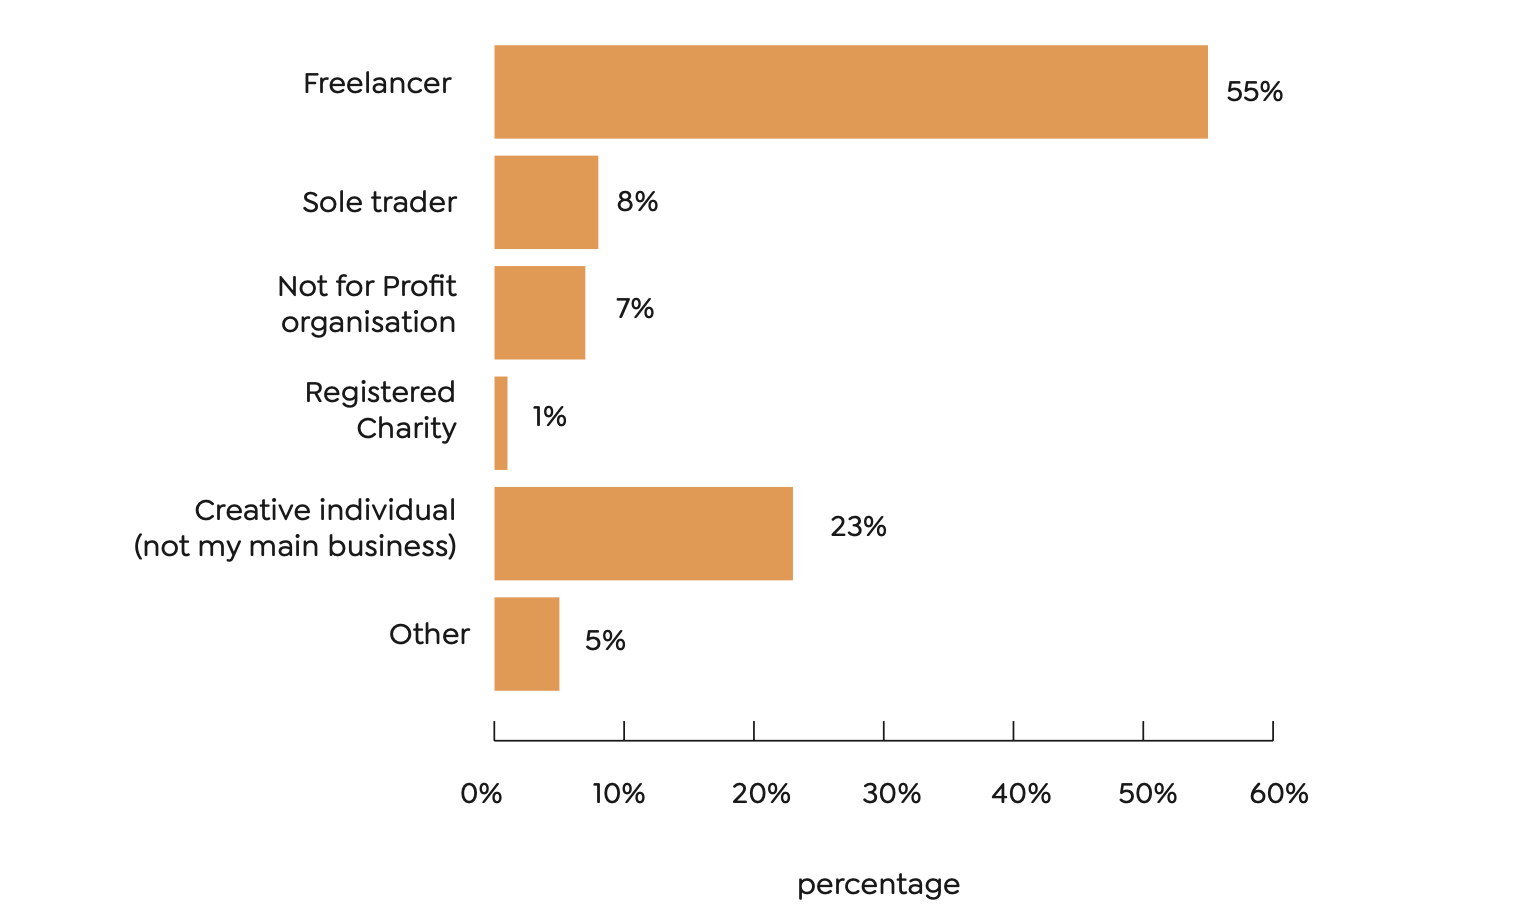 Freelancer: 55%
Sole trader: 8%
Not for profit organisation: 7%
Registered charity: 1%
Creative individual (not my main business) 23%
Other: 5%